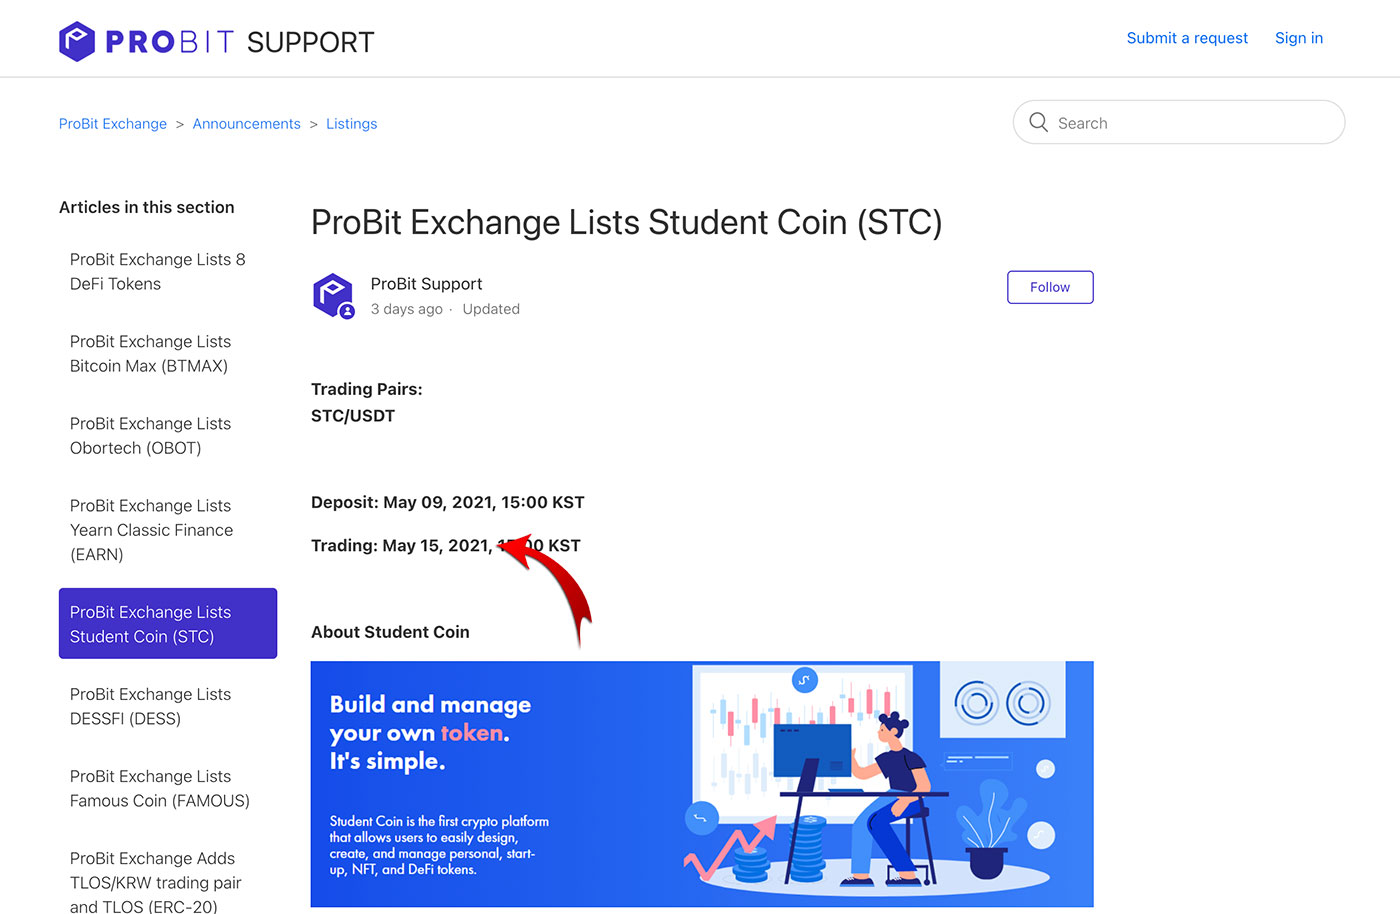 anons_probit_student_coin